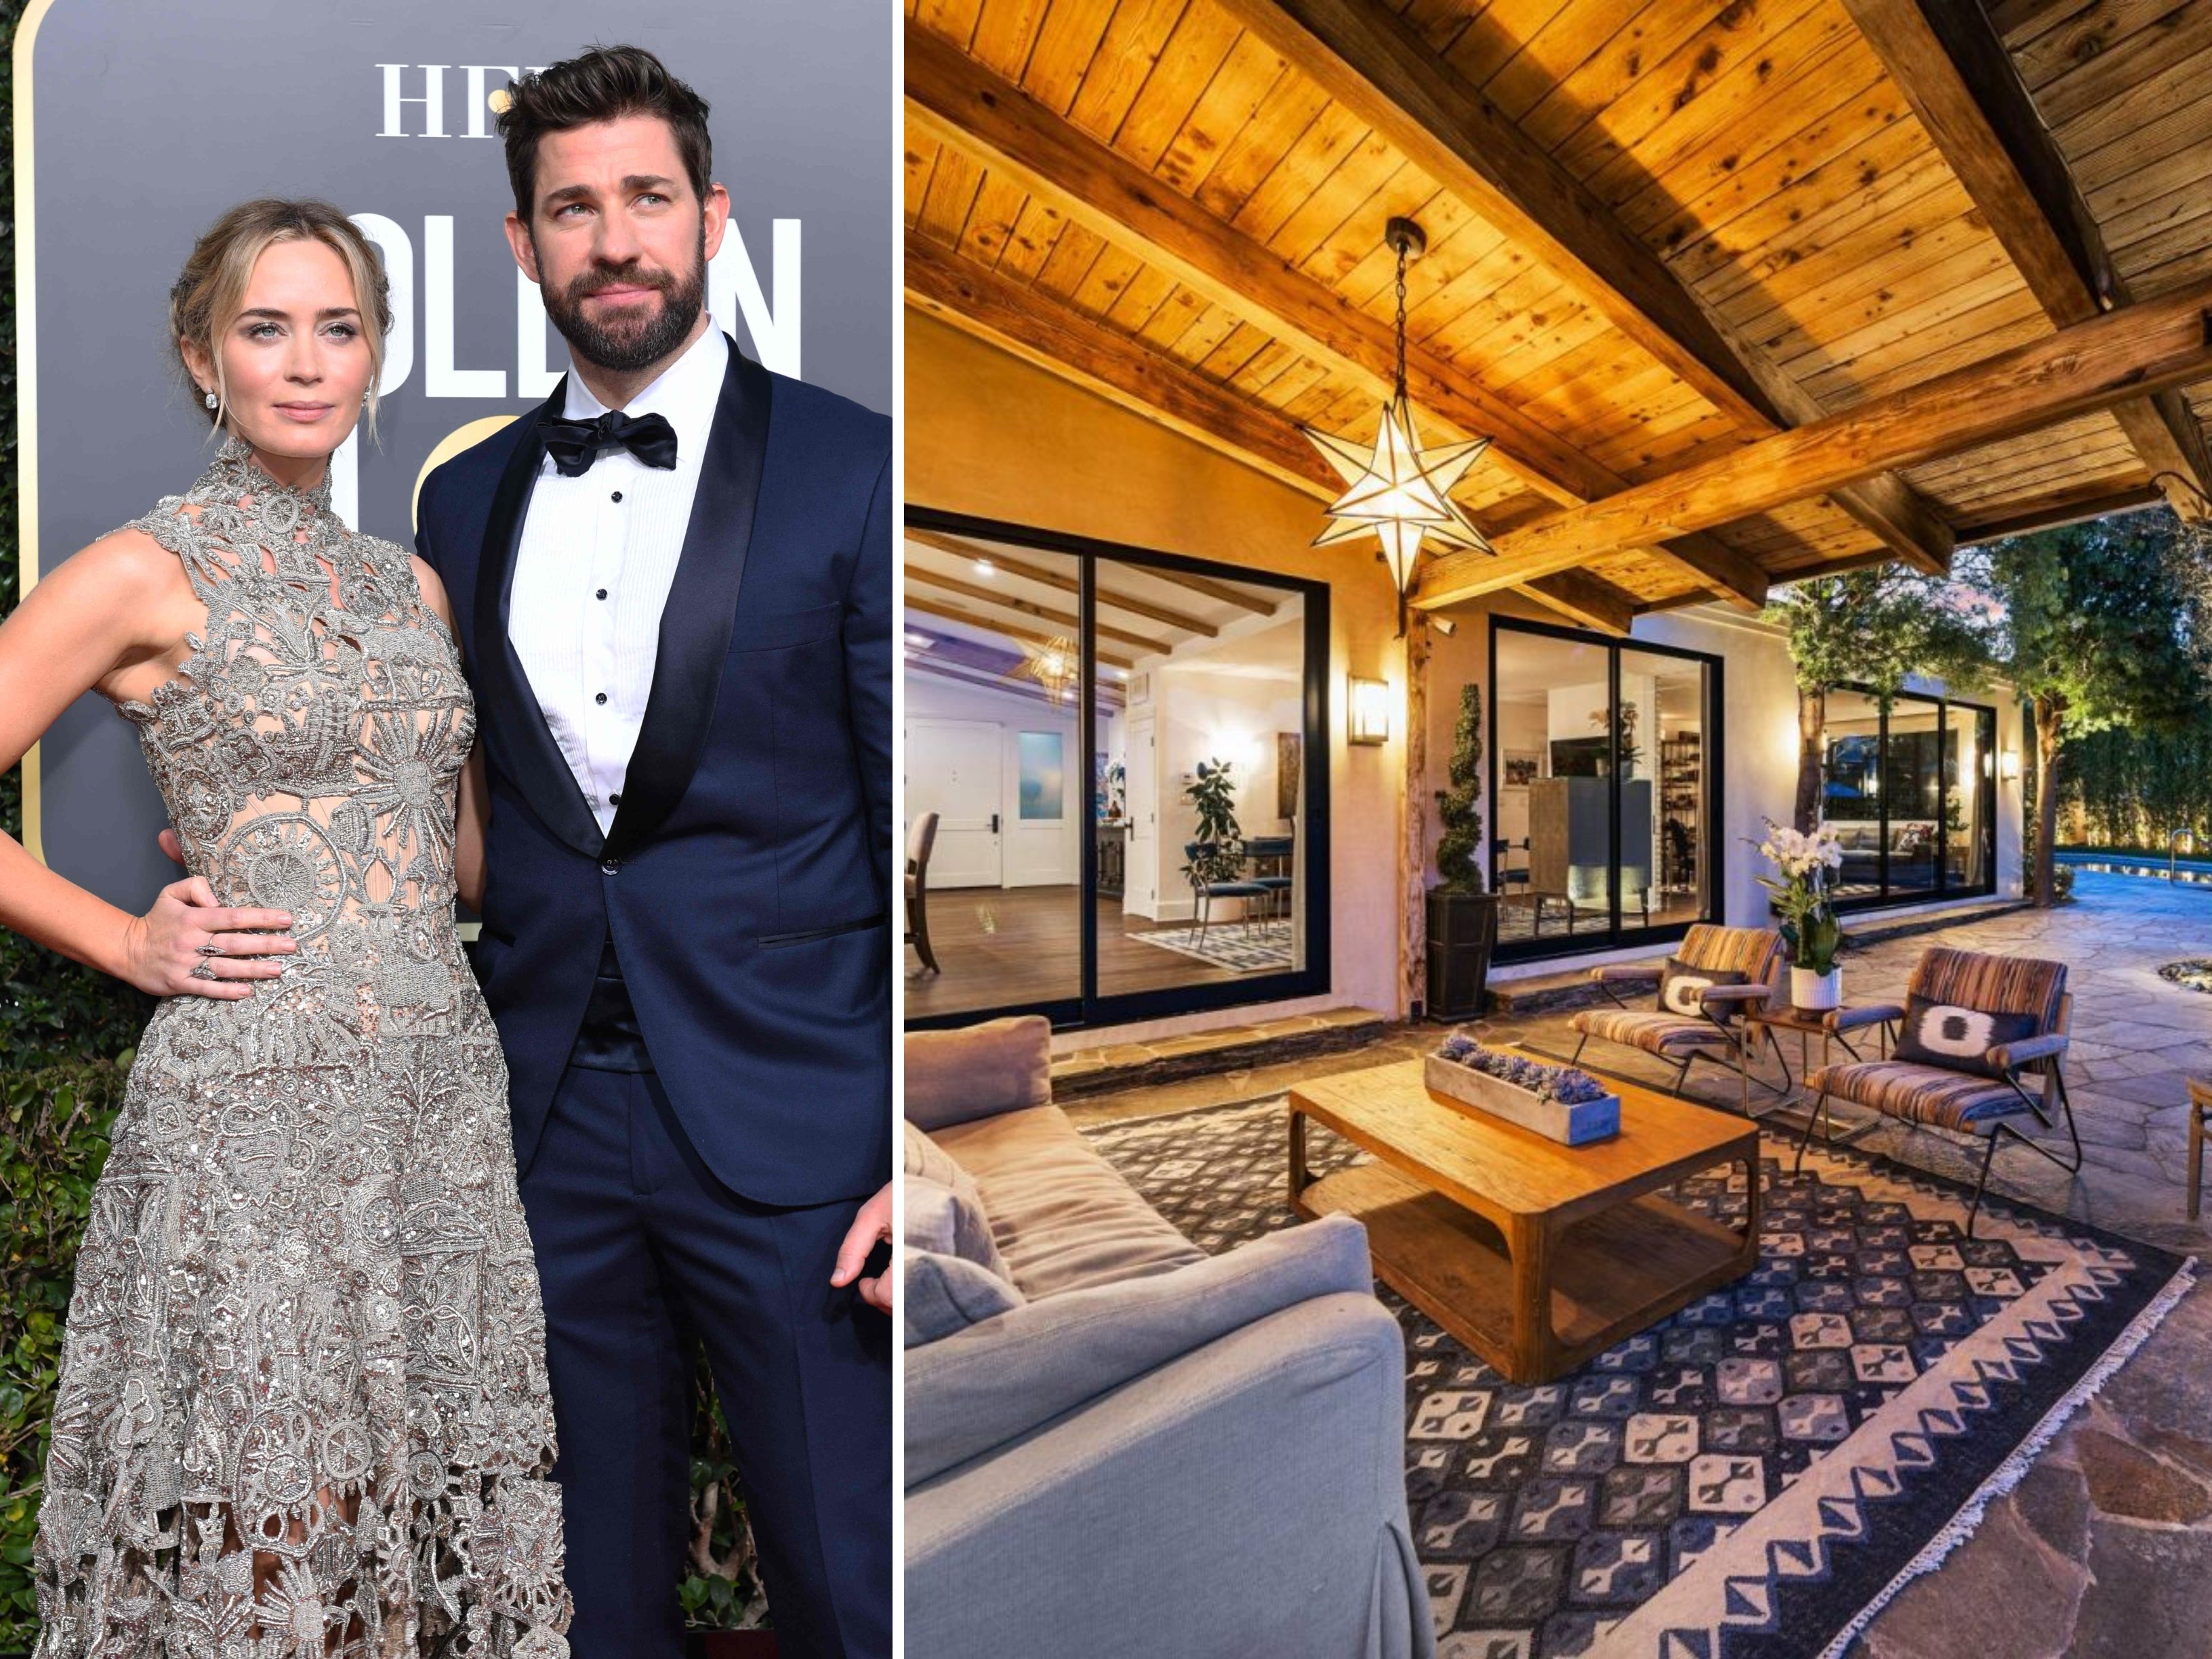 Emily Blunt and John Krasinski’s former Hollywood Hills home is going up for sale. Photos: One Shot Productions, AFP